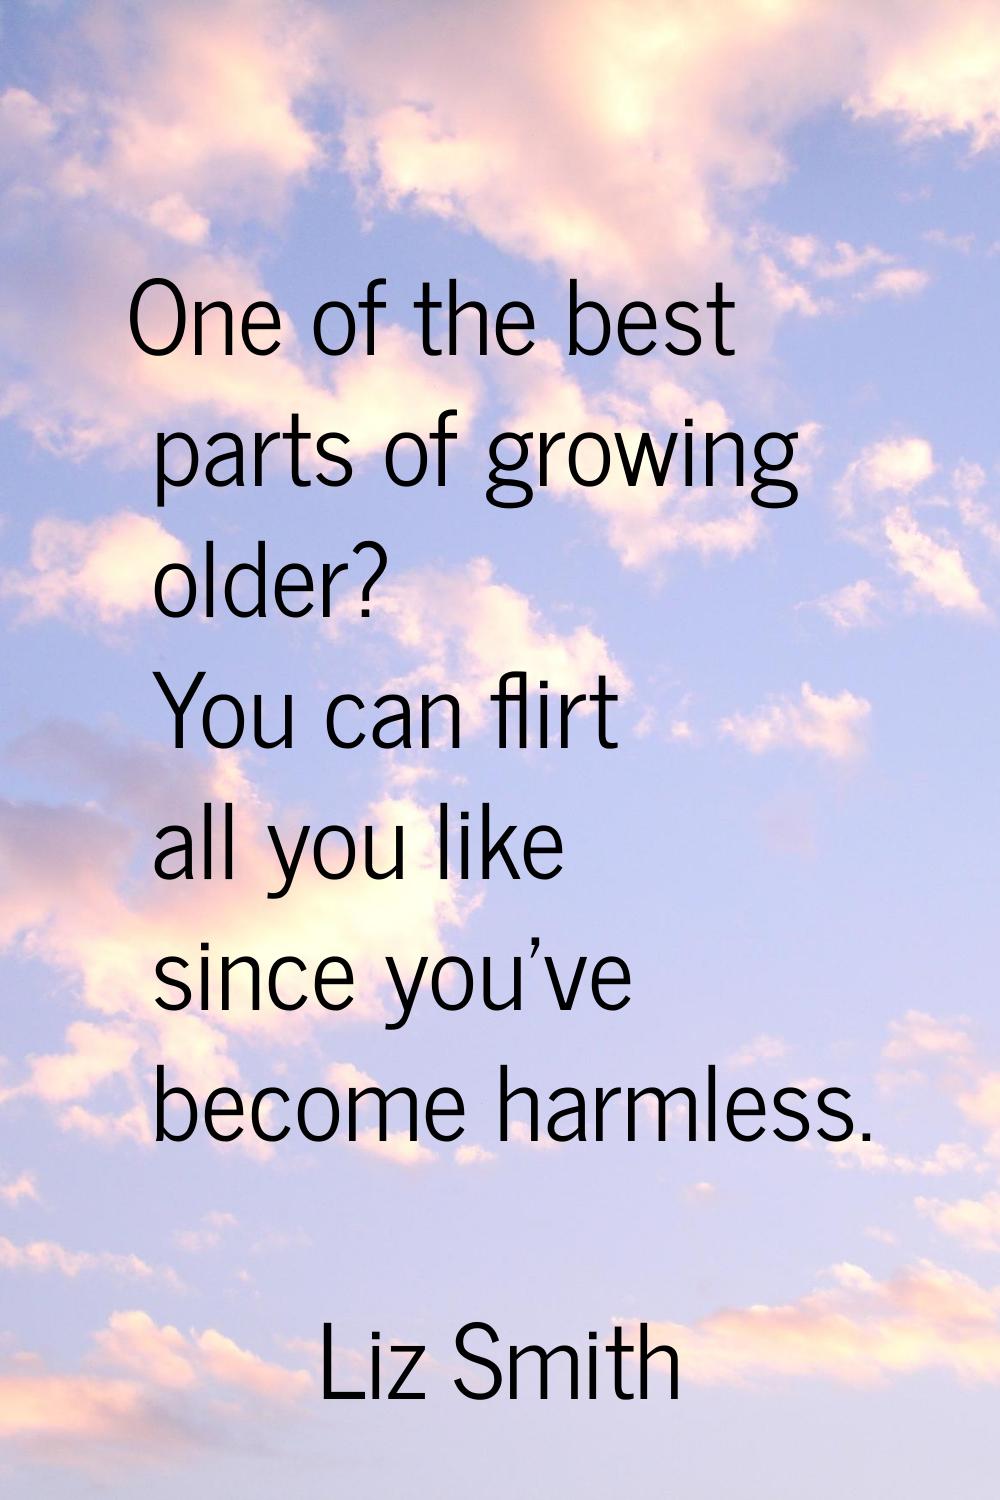 One of the best parts of growing older? You can flirt all you like since you've become harmless.